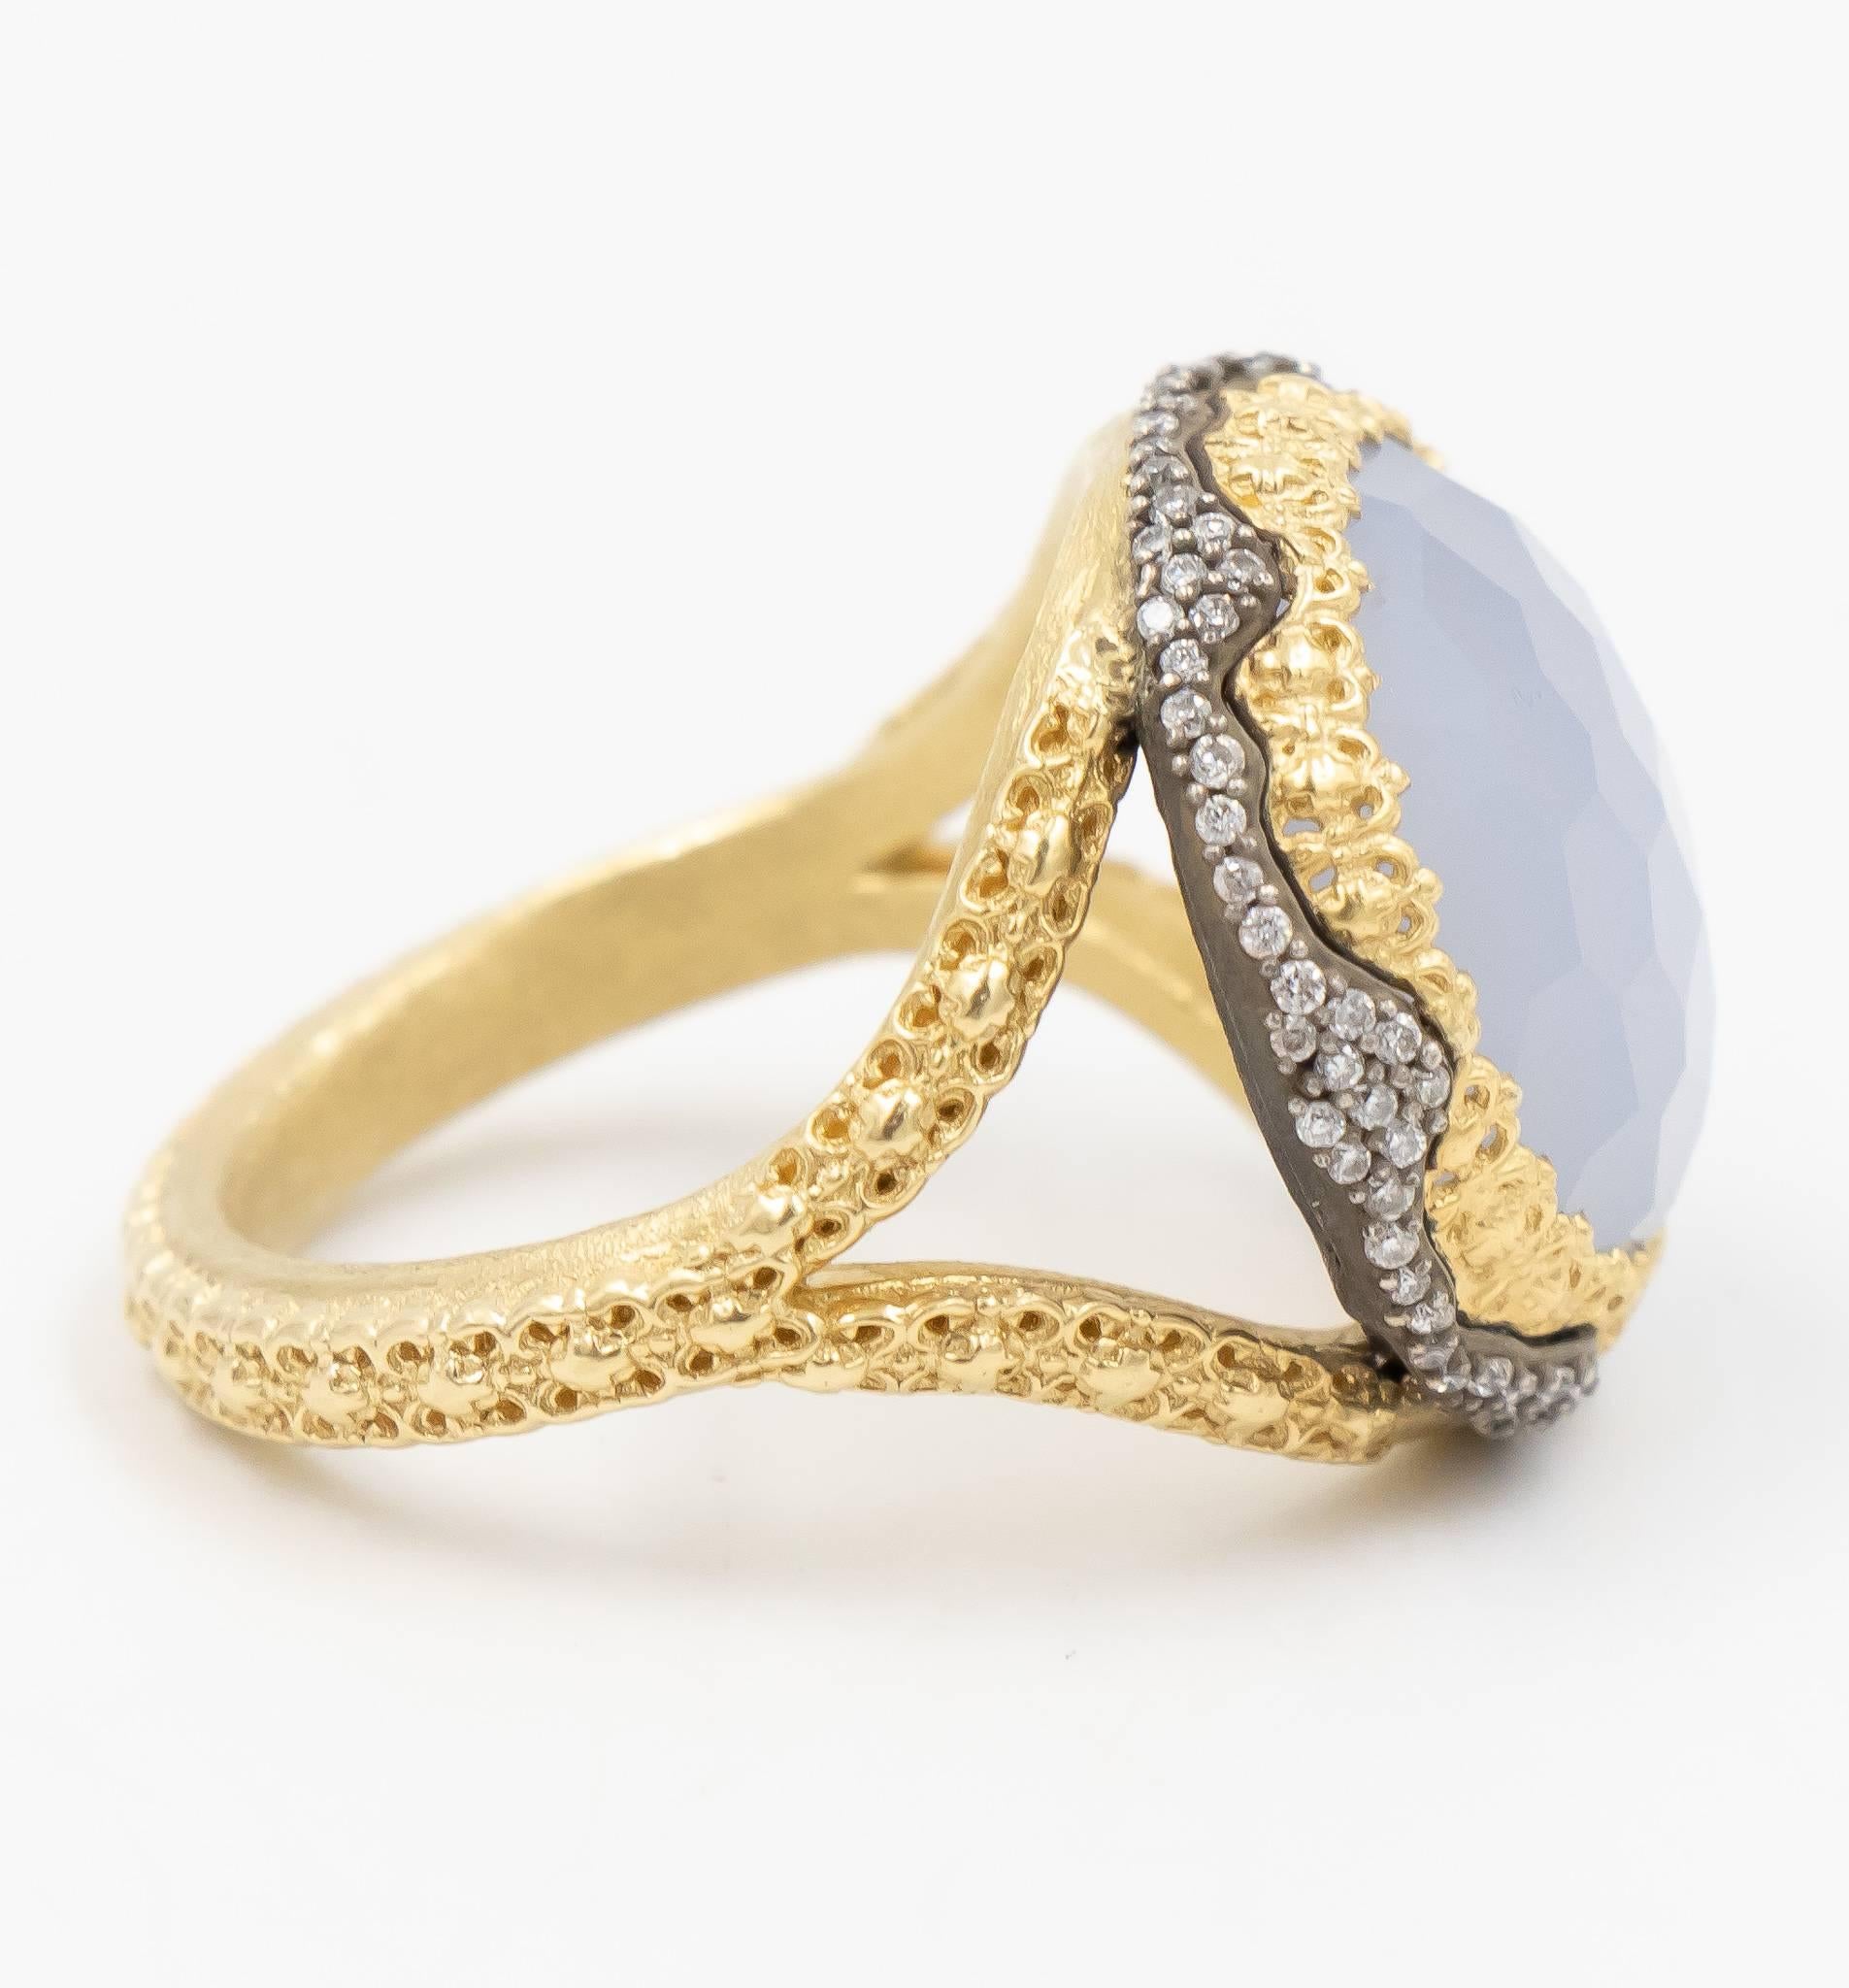 This Armenta ring is from the Old World collection and features an 18 karat yellow gold band mixed with the Armenta's signature 